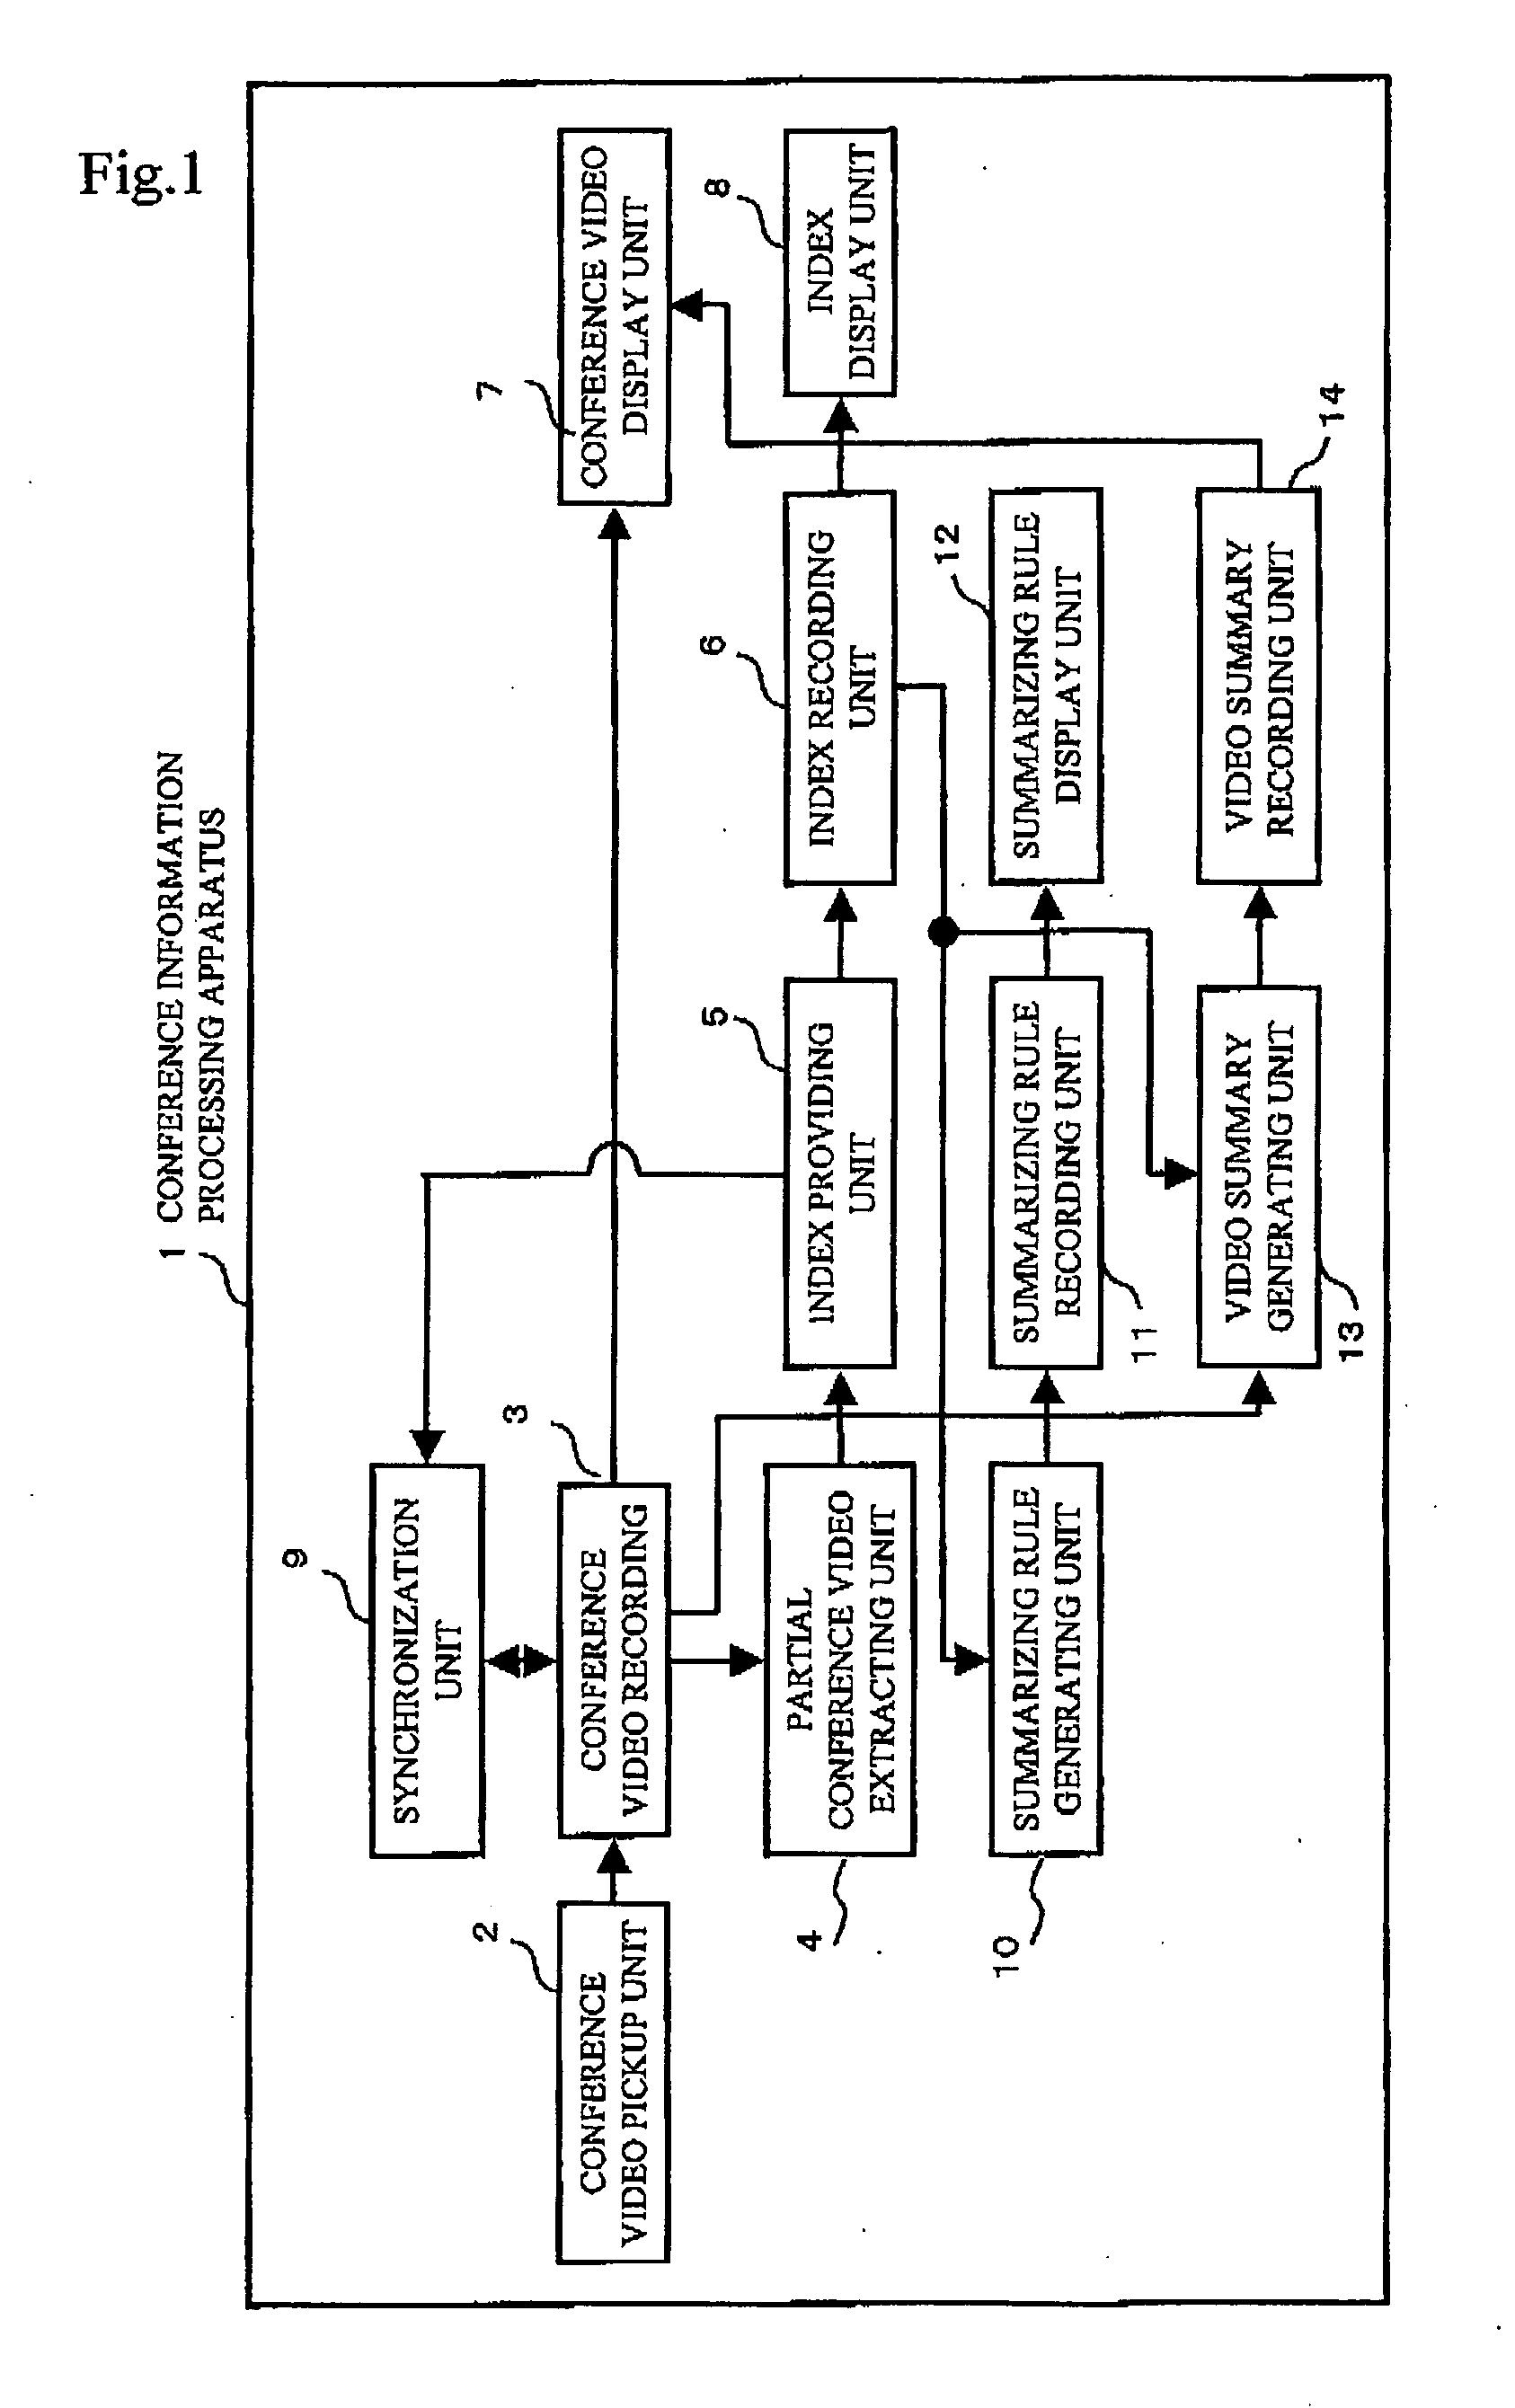 Conference information processing apparatus, and conference information processing method and storage medium readable by computer